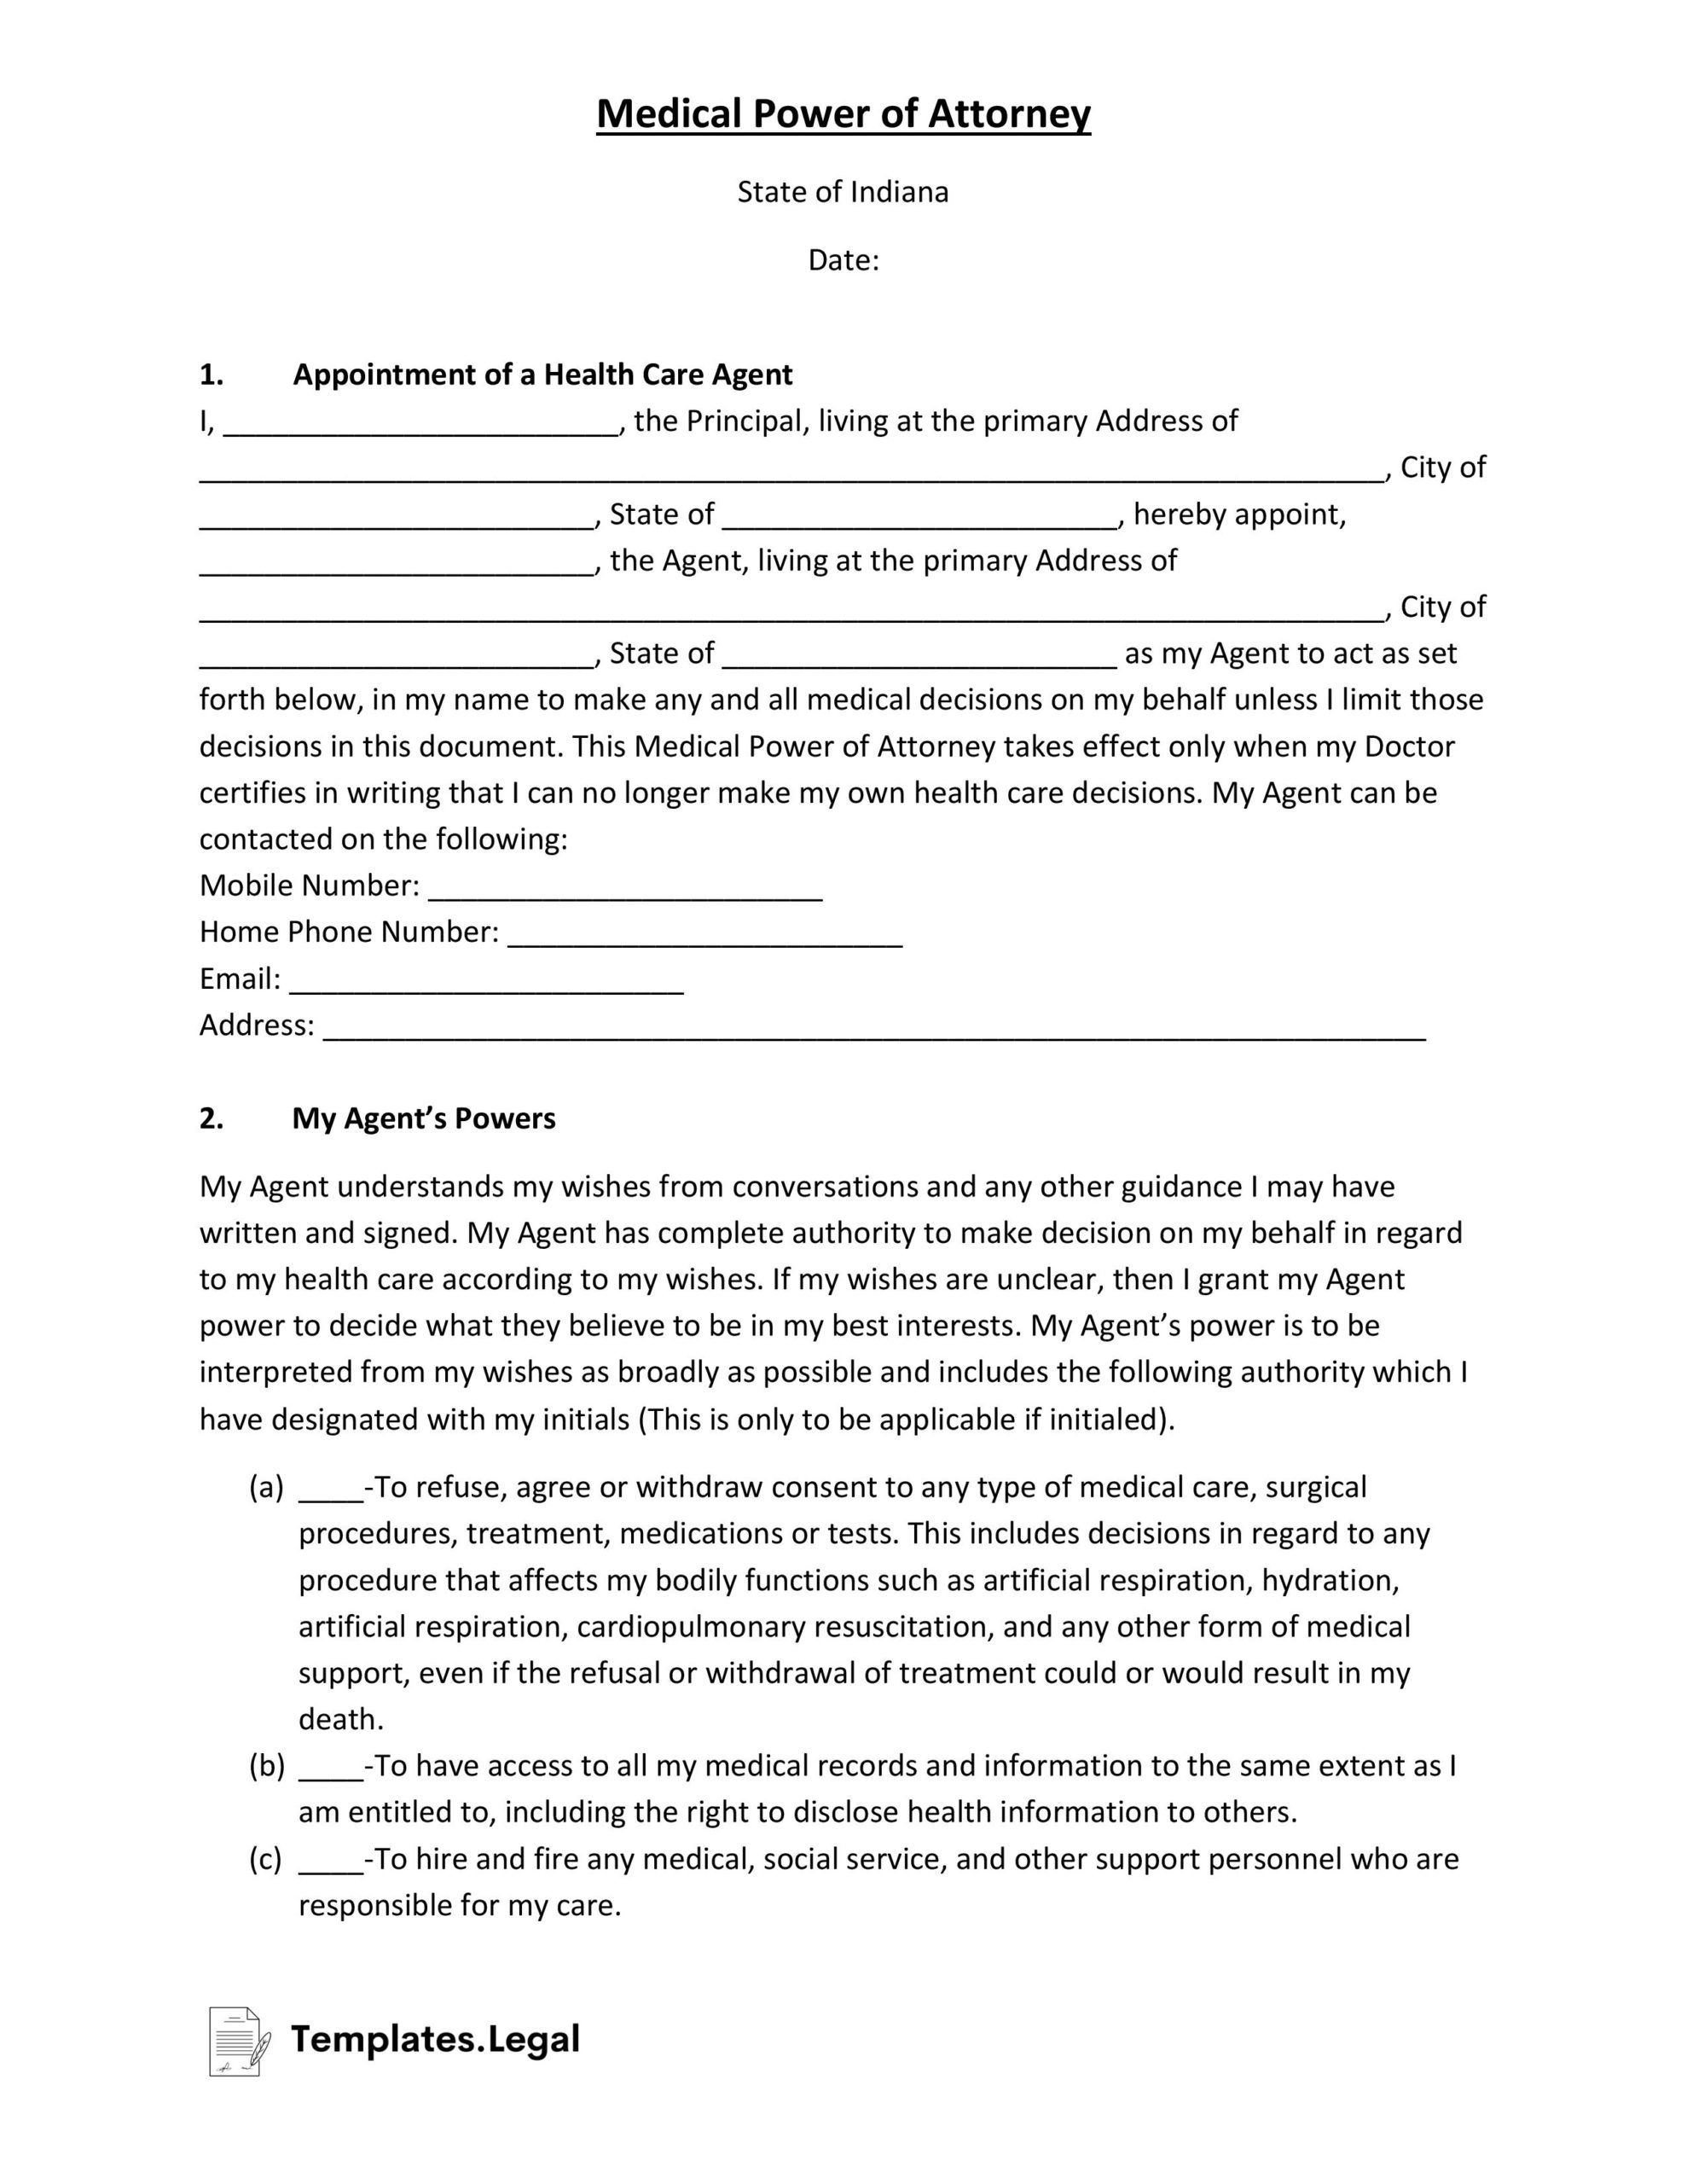 Indiana Medical Power of Attorney- Templates.Legal